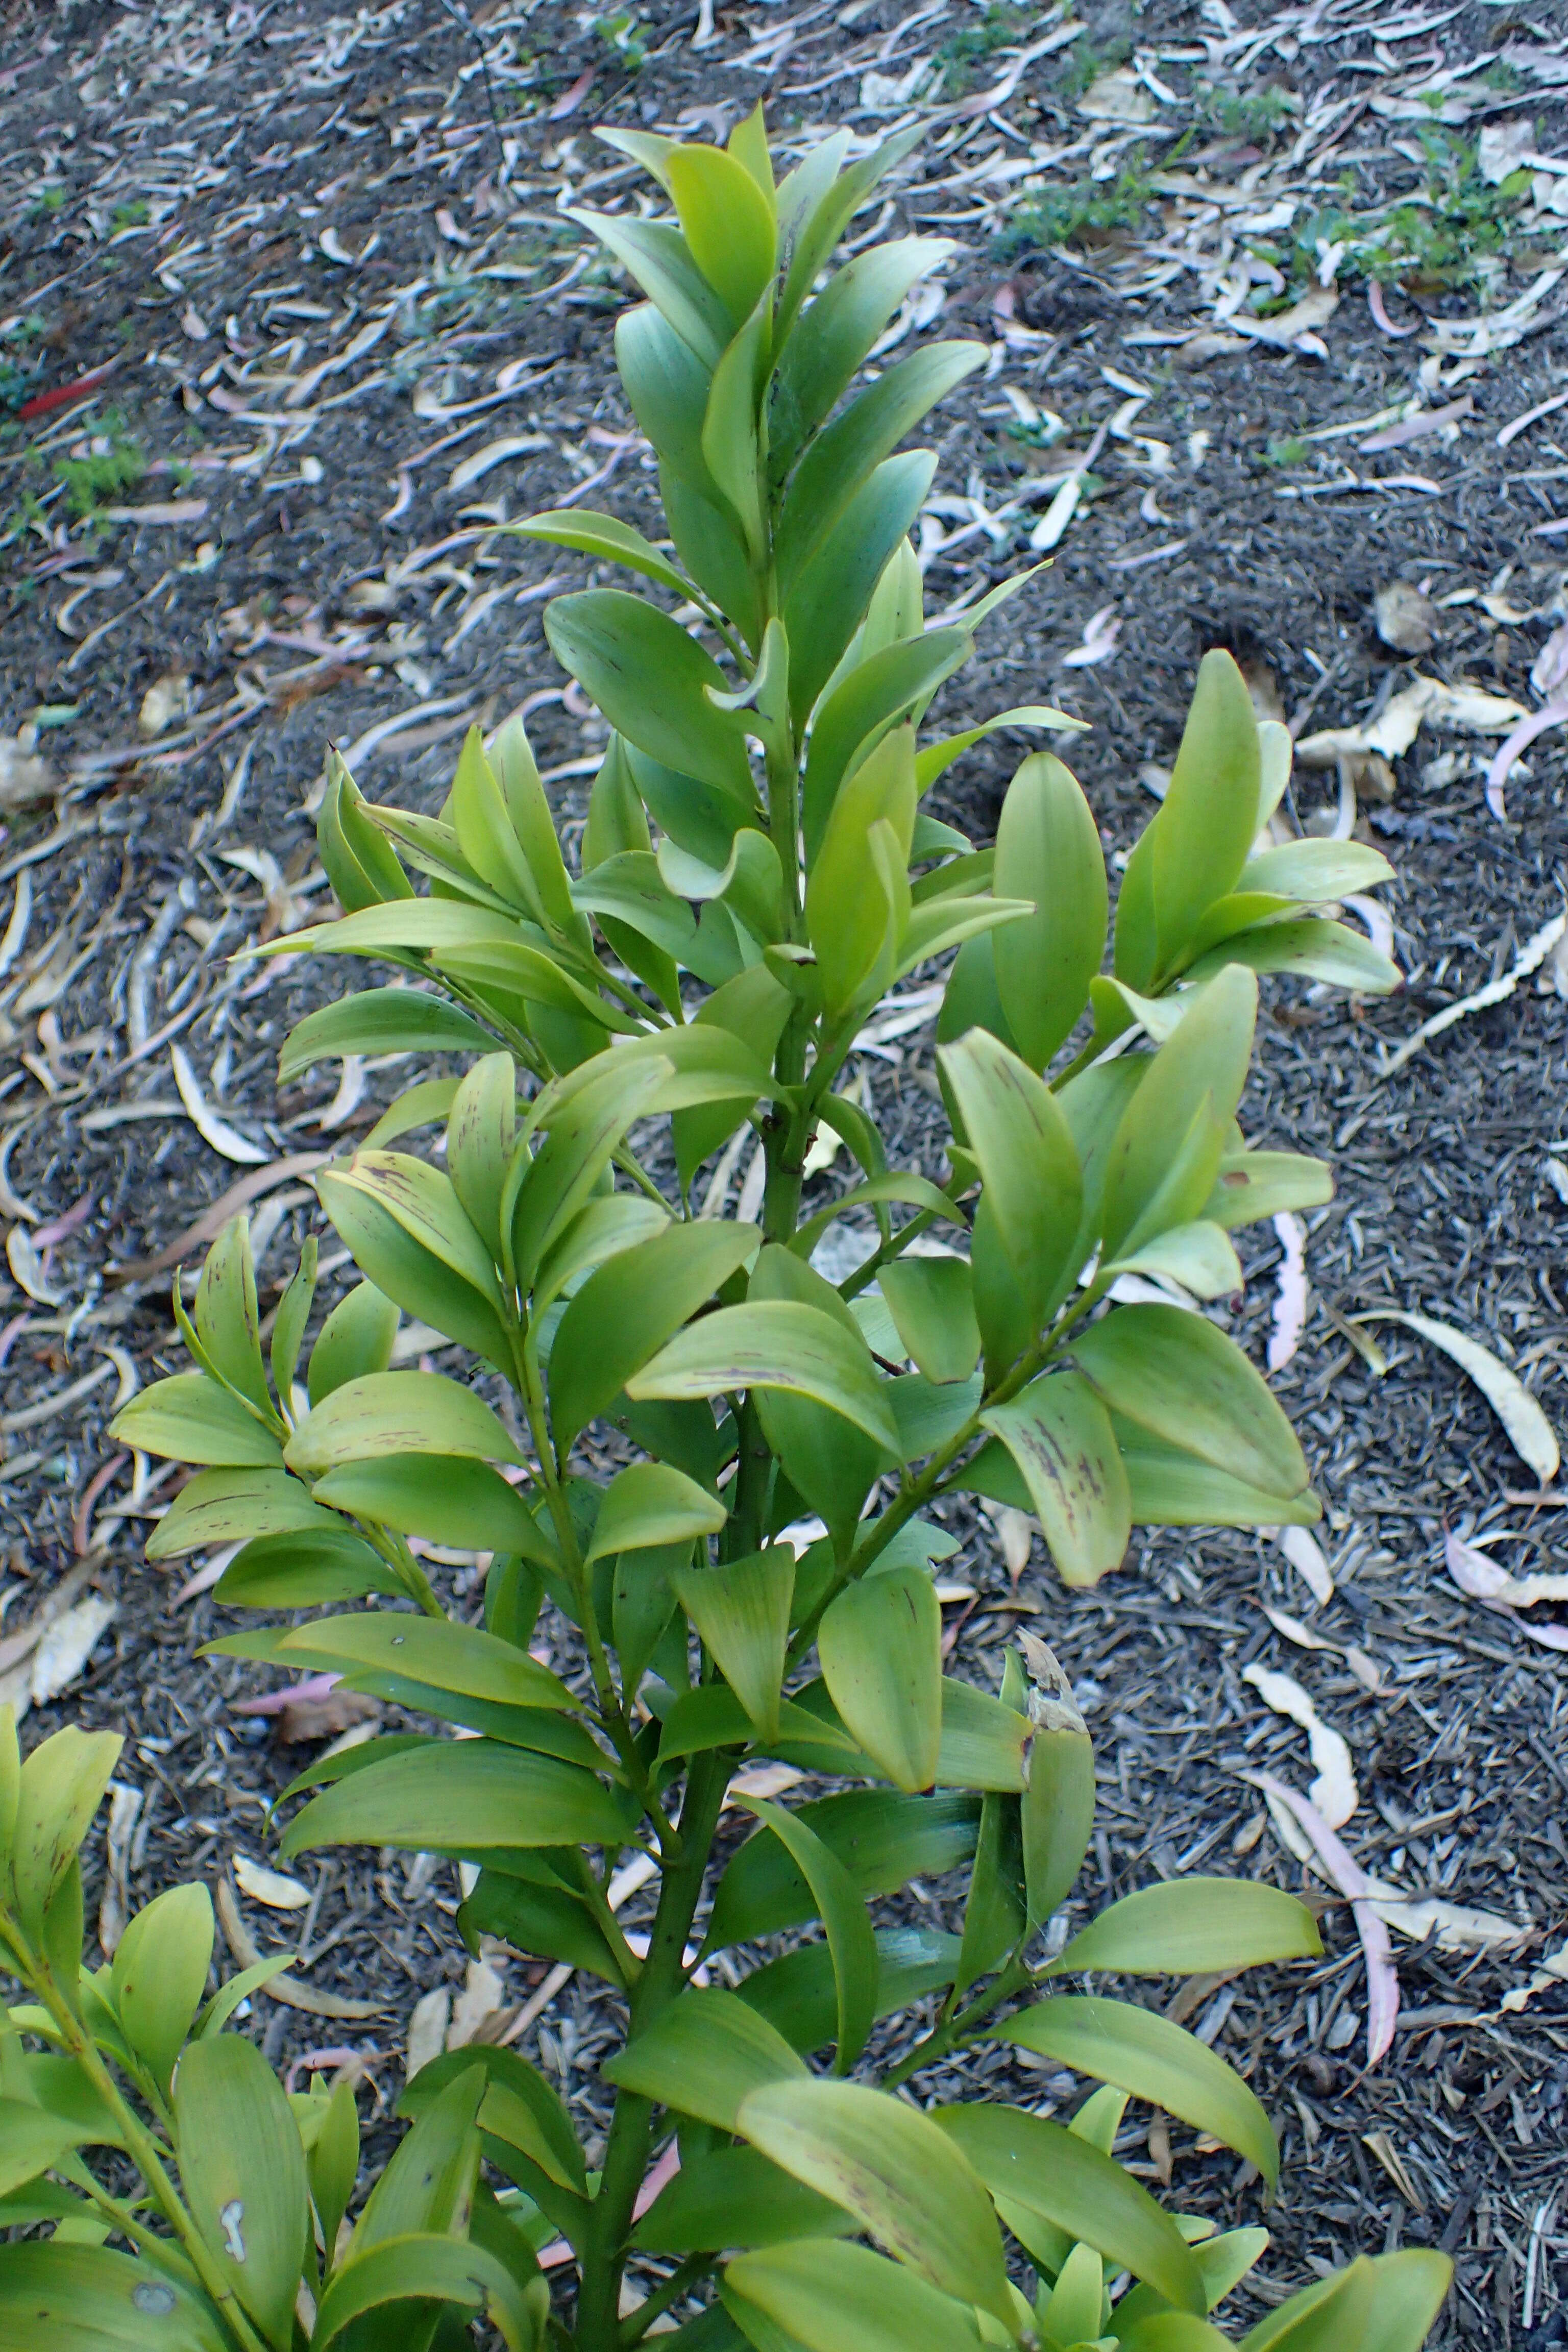 Image of Asian bayberry